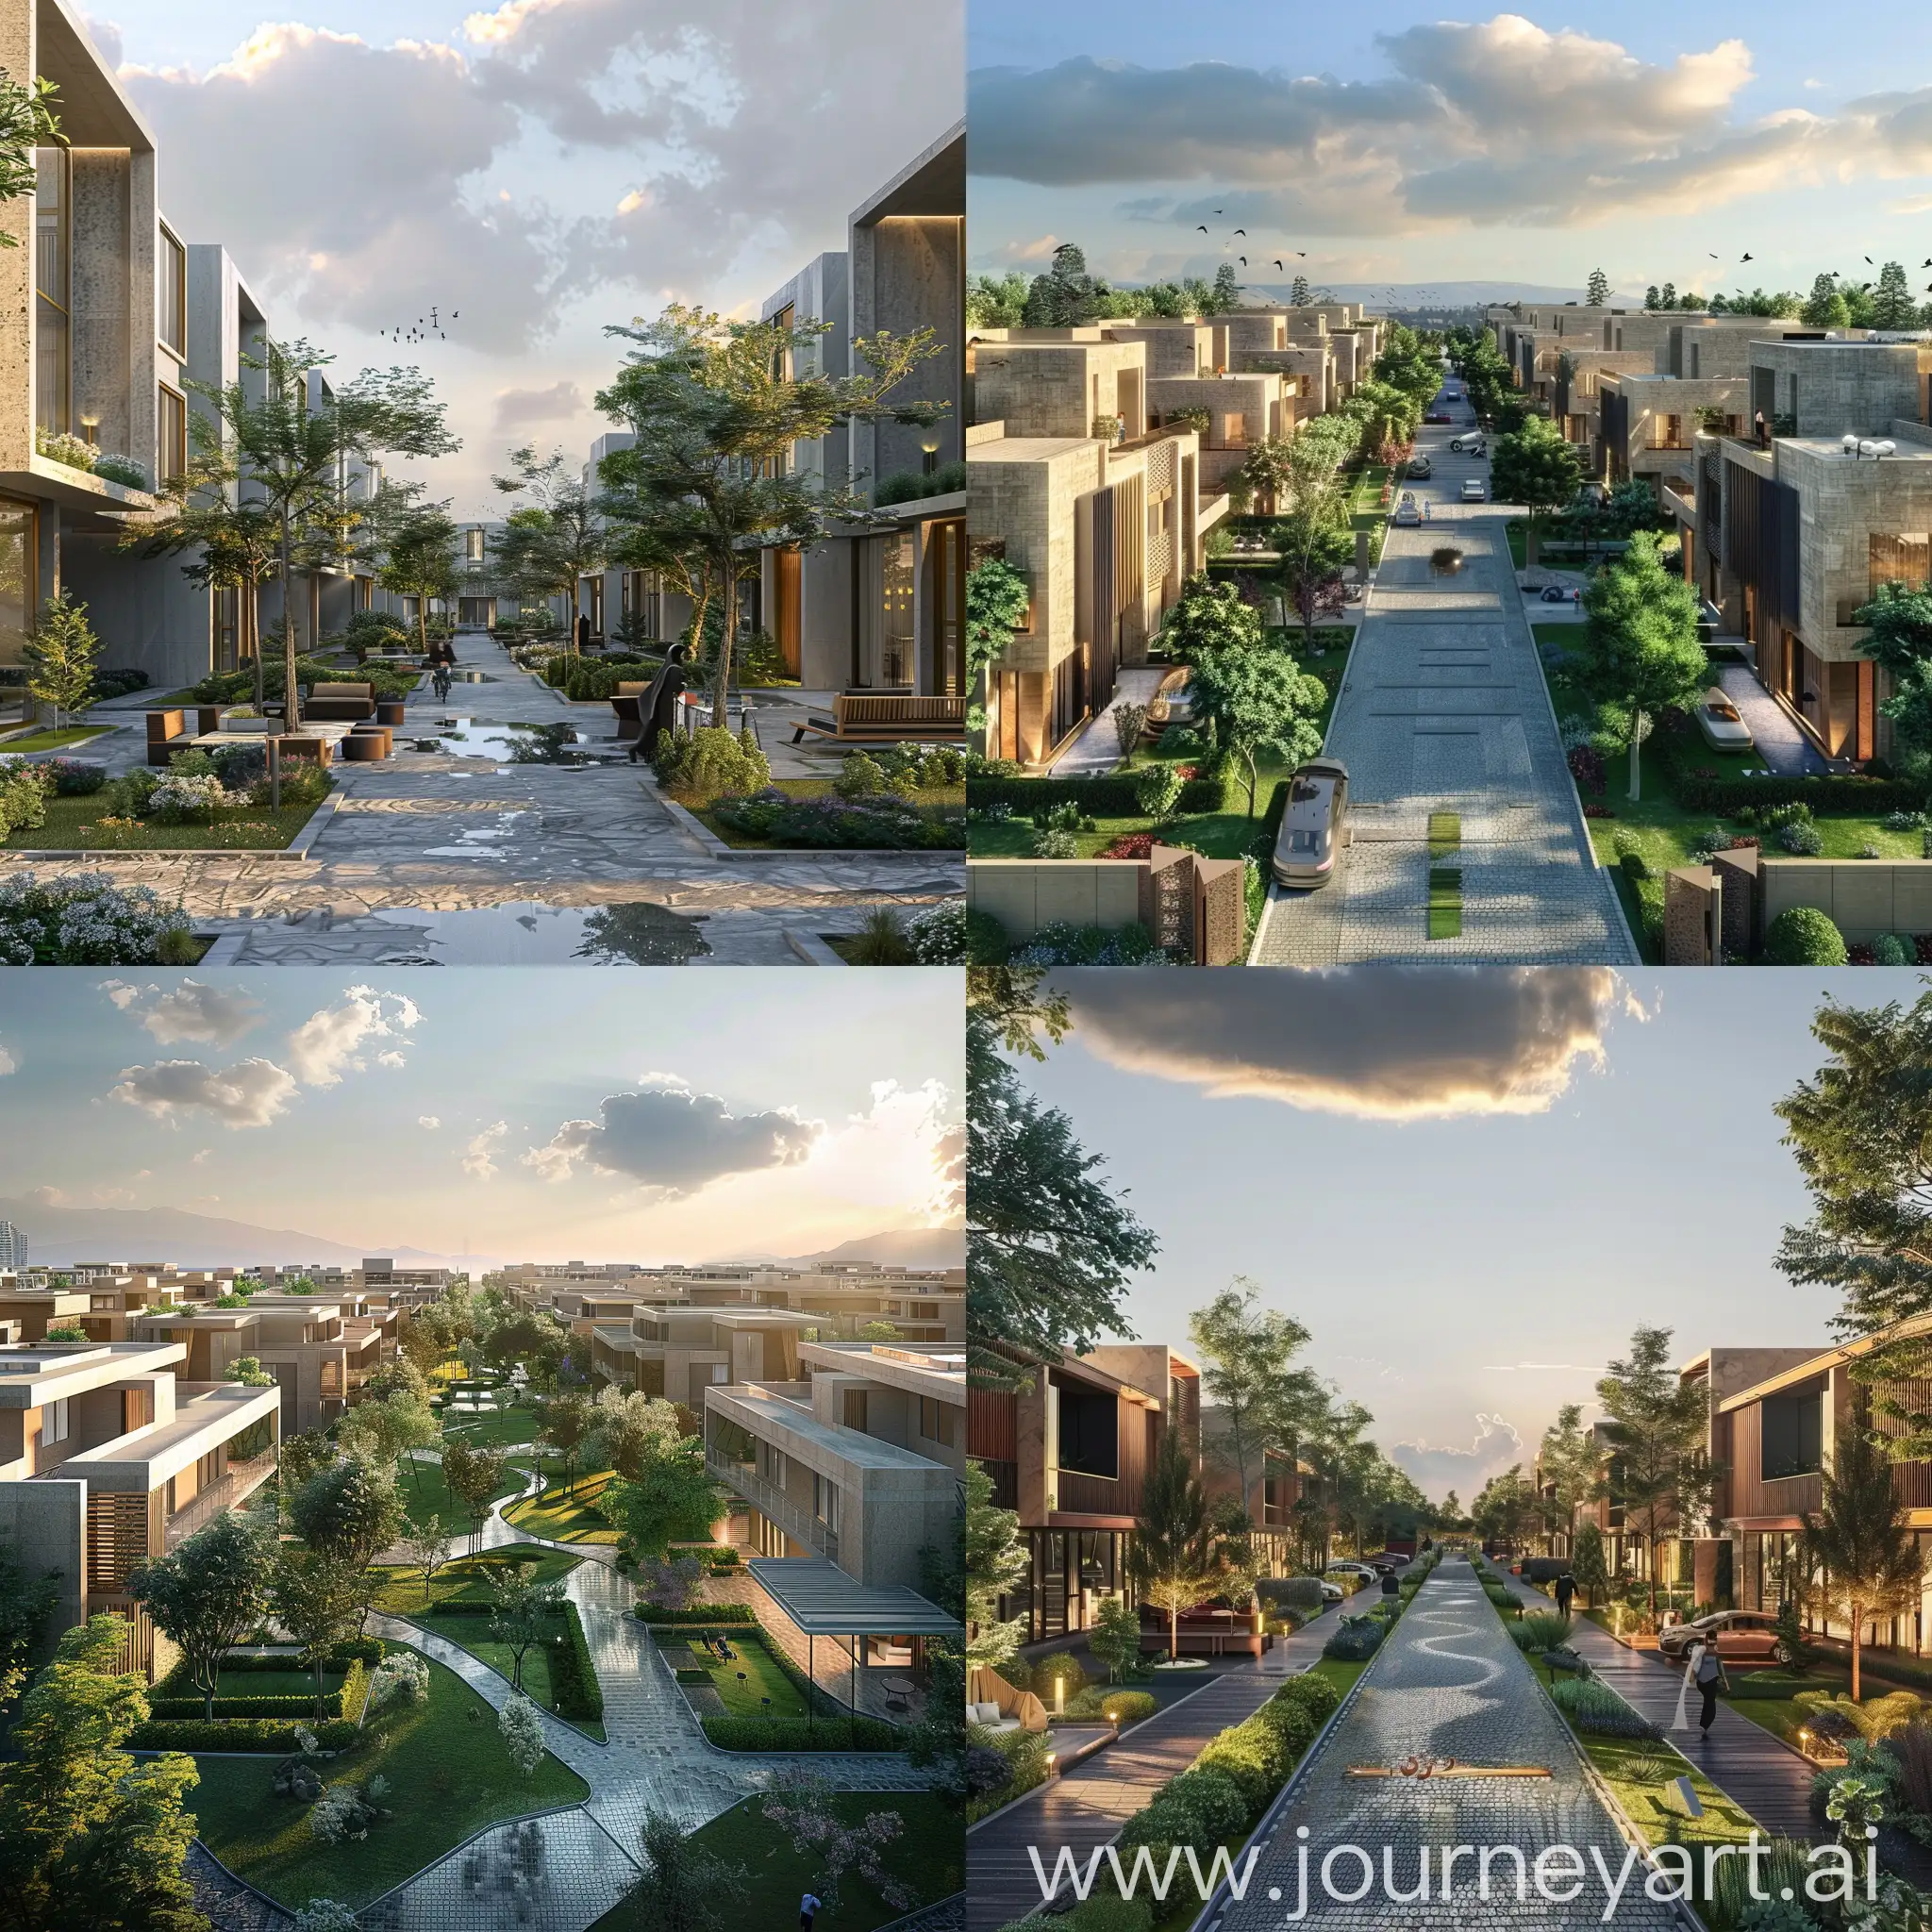 A residential town with an area of ​​10,000 square meters with an Iranian design and an Iranian feeling with green space